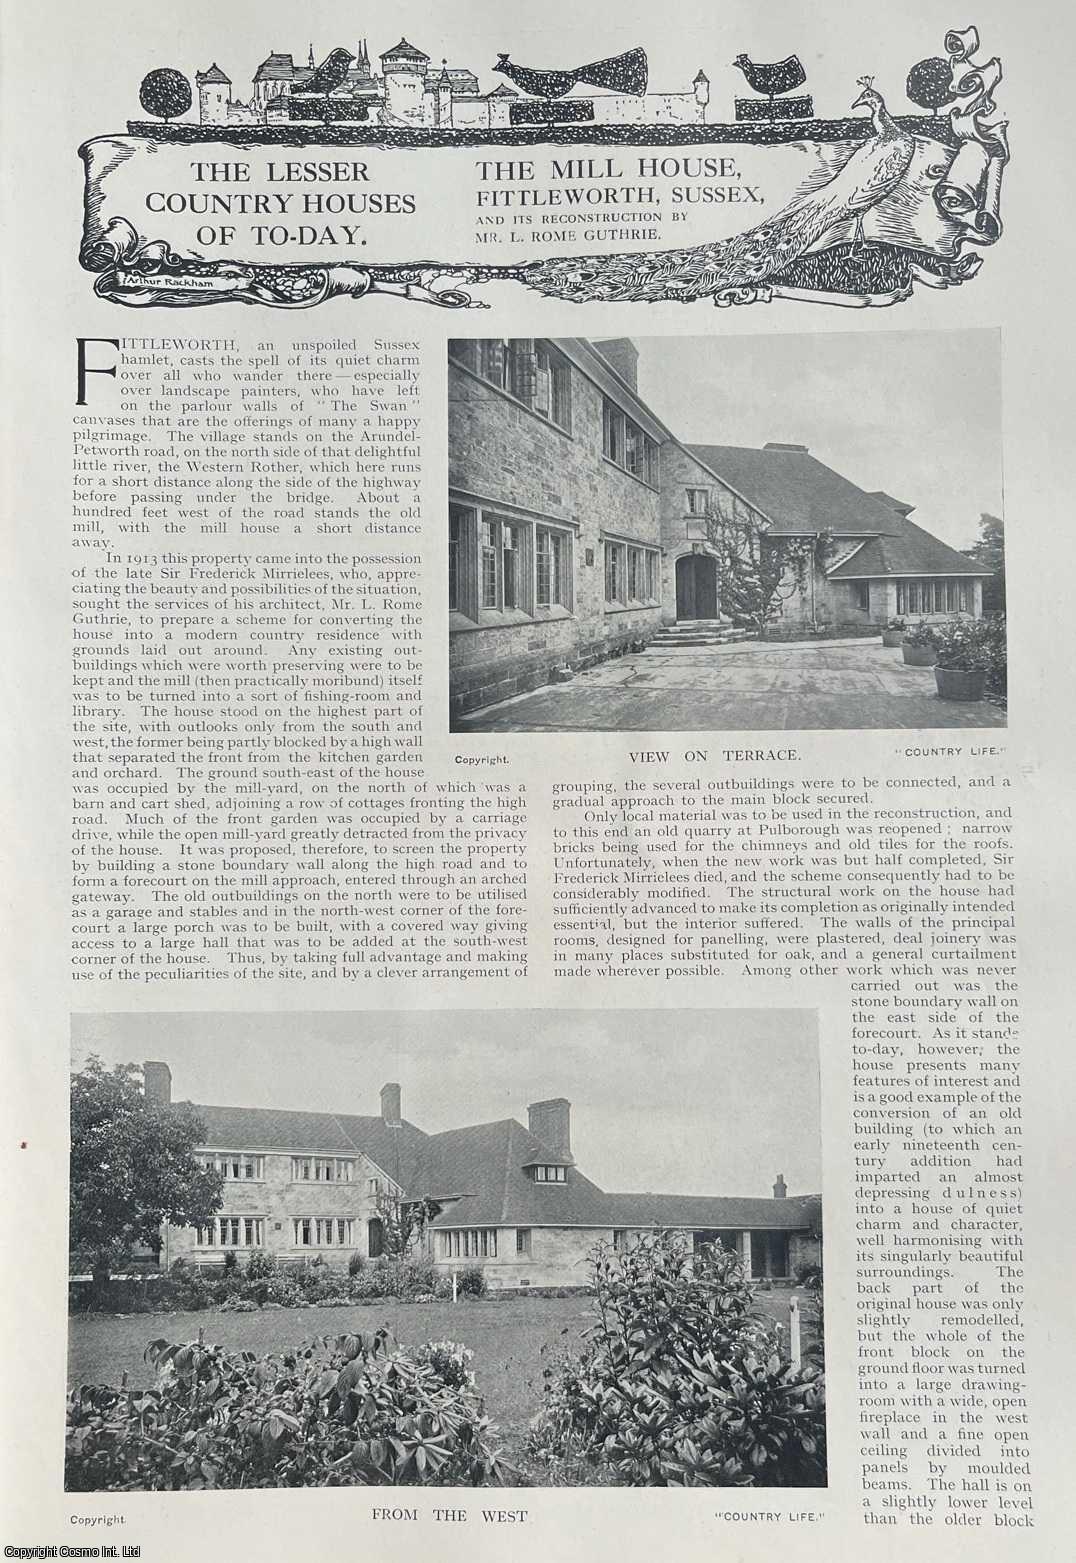 Country Life Magazine - The Mill House, Fittleworth, Sussex. Several pictures and accompanying text, removed from an original issue of Country Life Magazine, 1923.